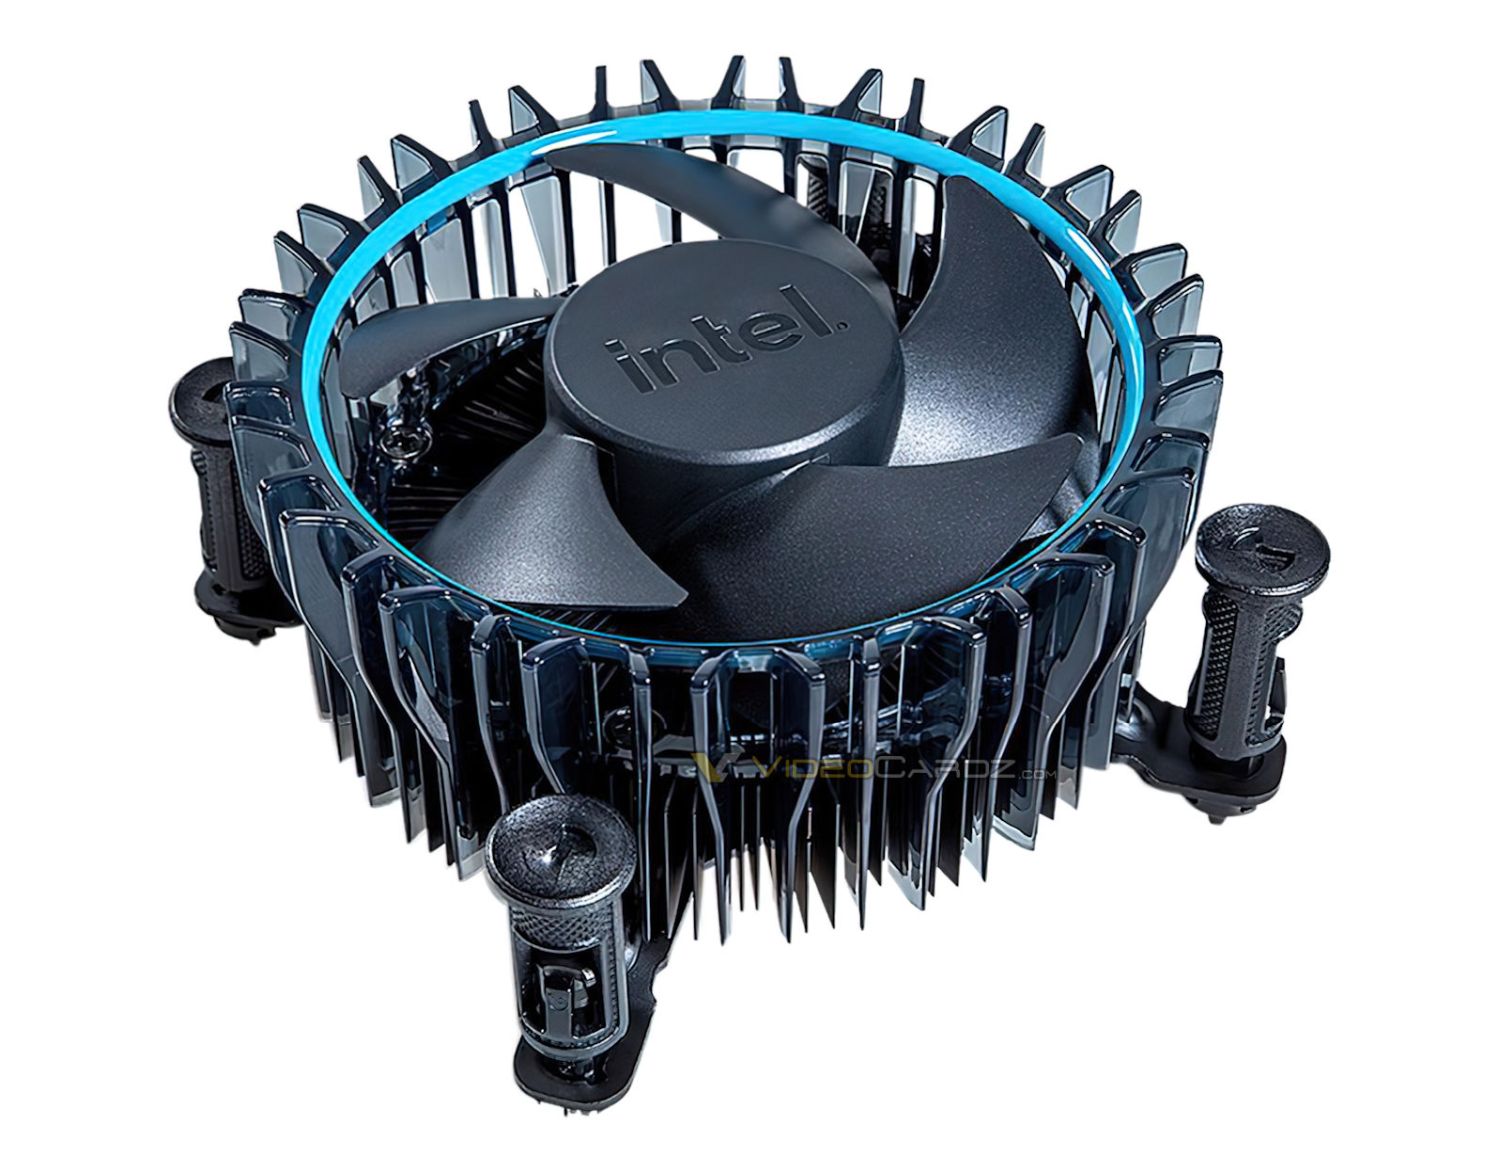 Here Is Your First Look At The New Intel CPU Stock Cooler For Alder Lake